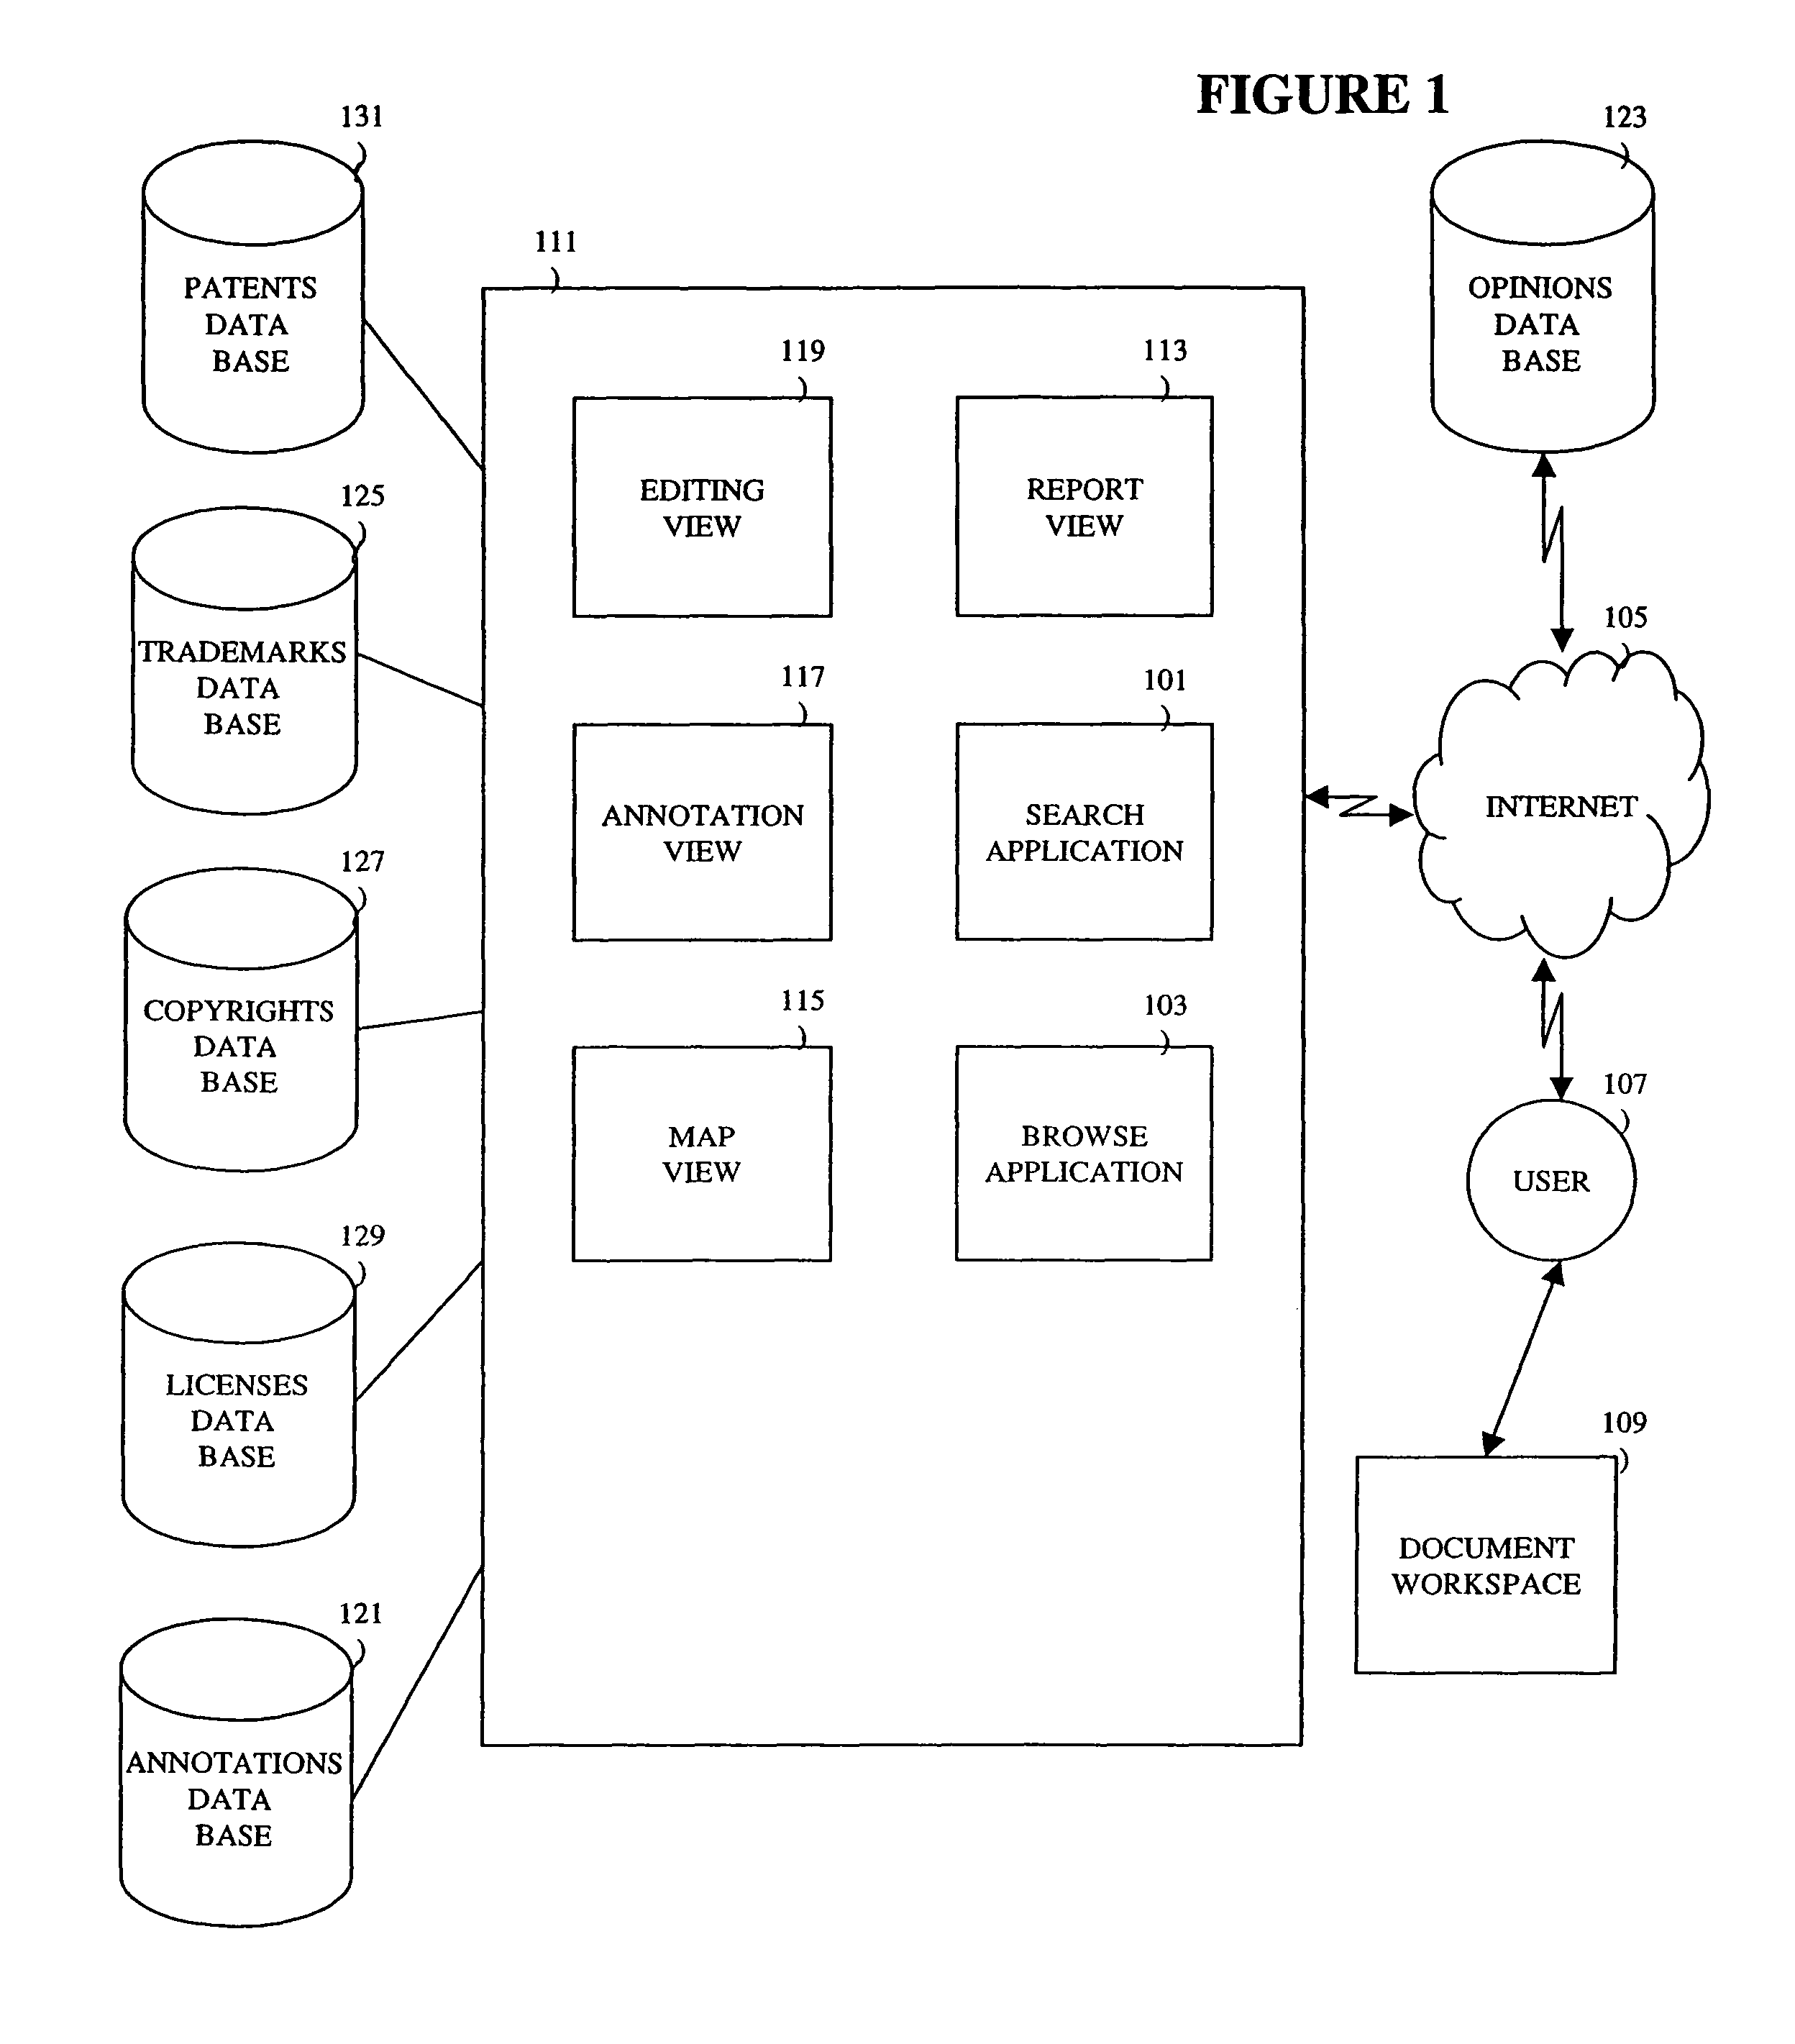 Computer assisted and/or implemented process and system for annotating and/or linking documents and data, optionally in an intellectual property management system